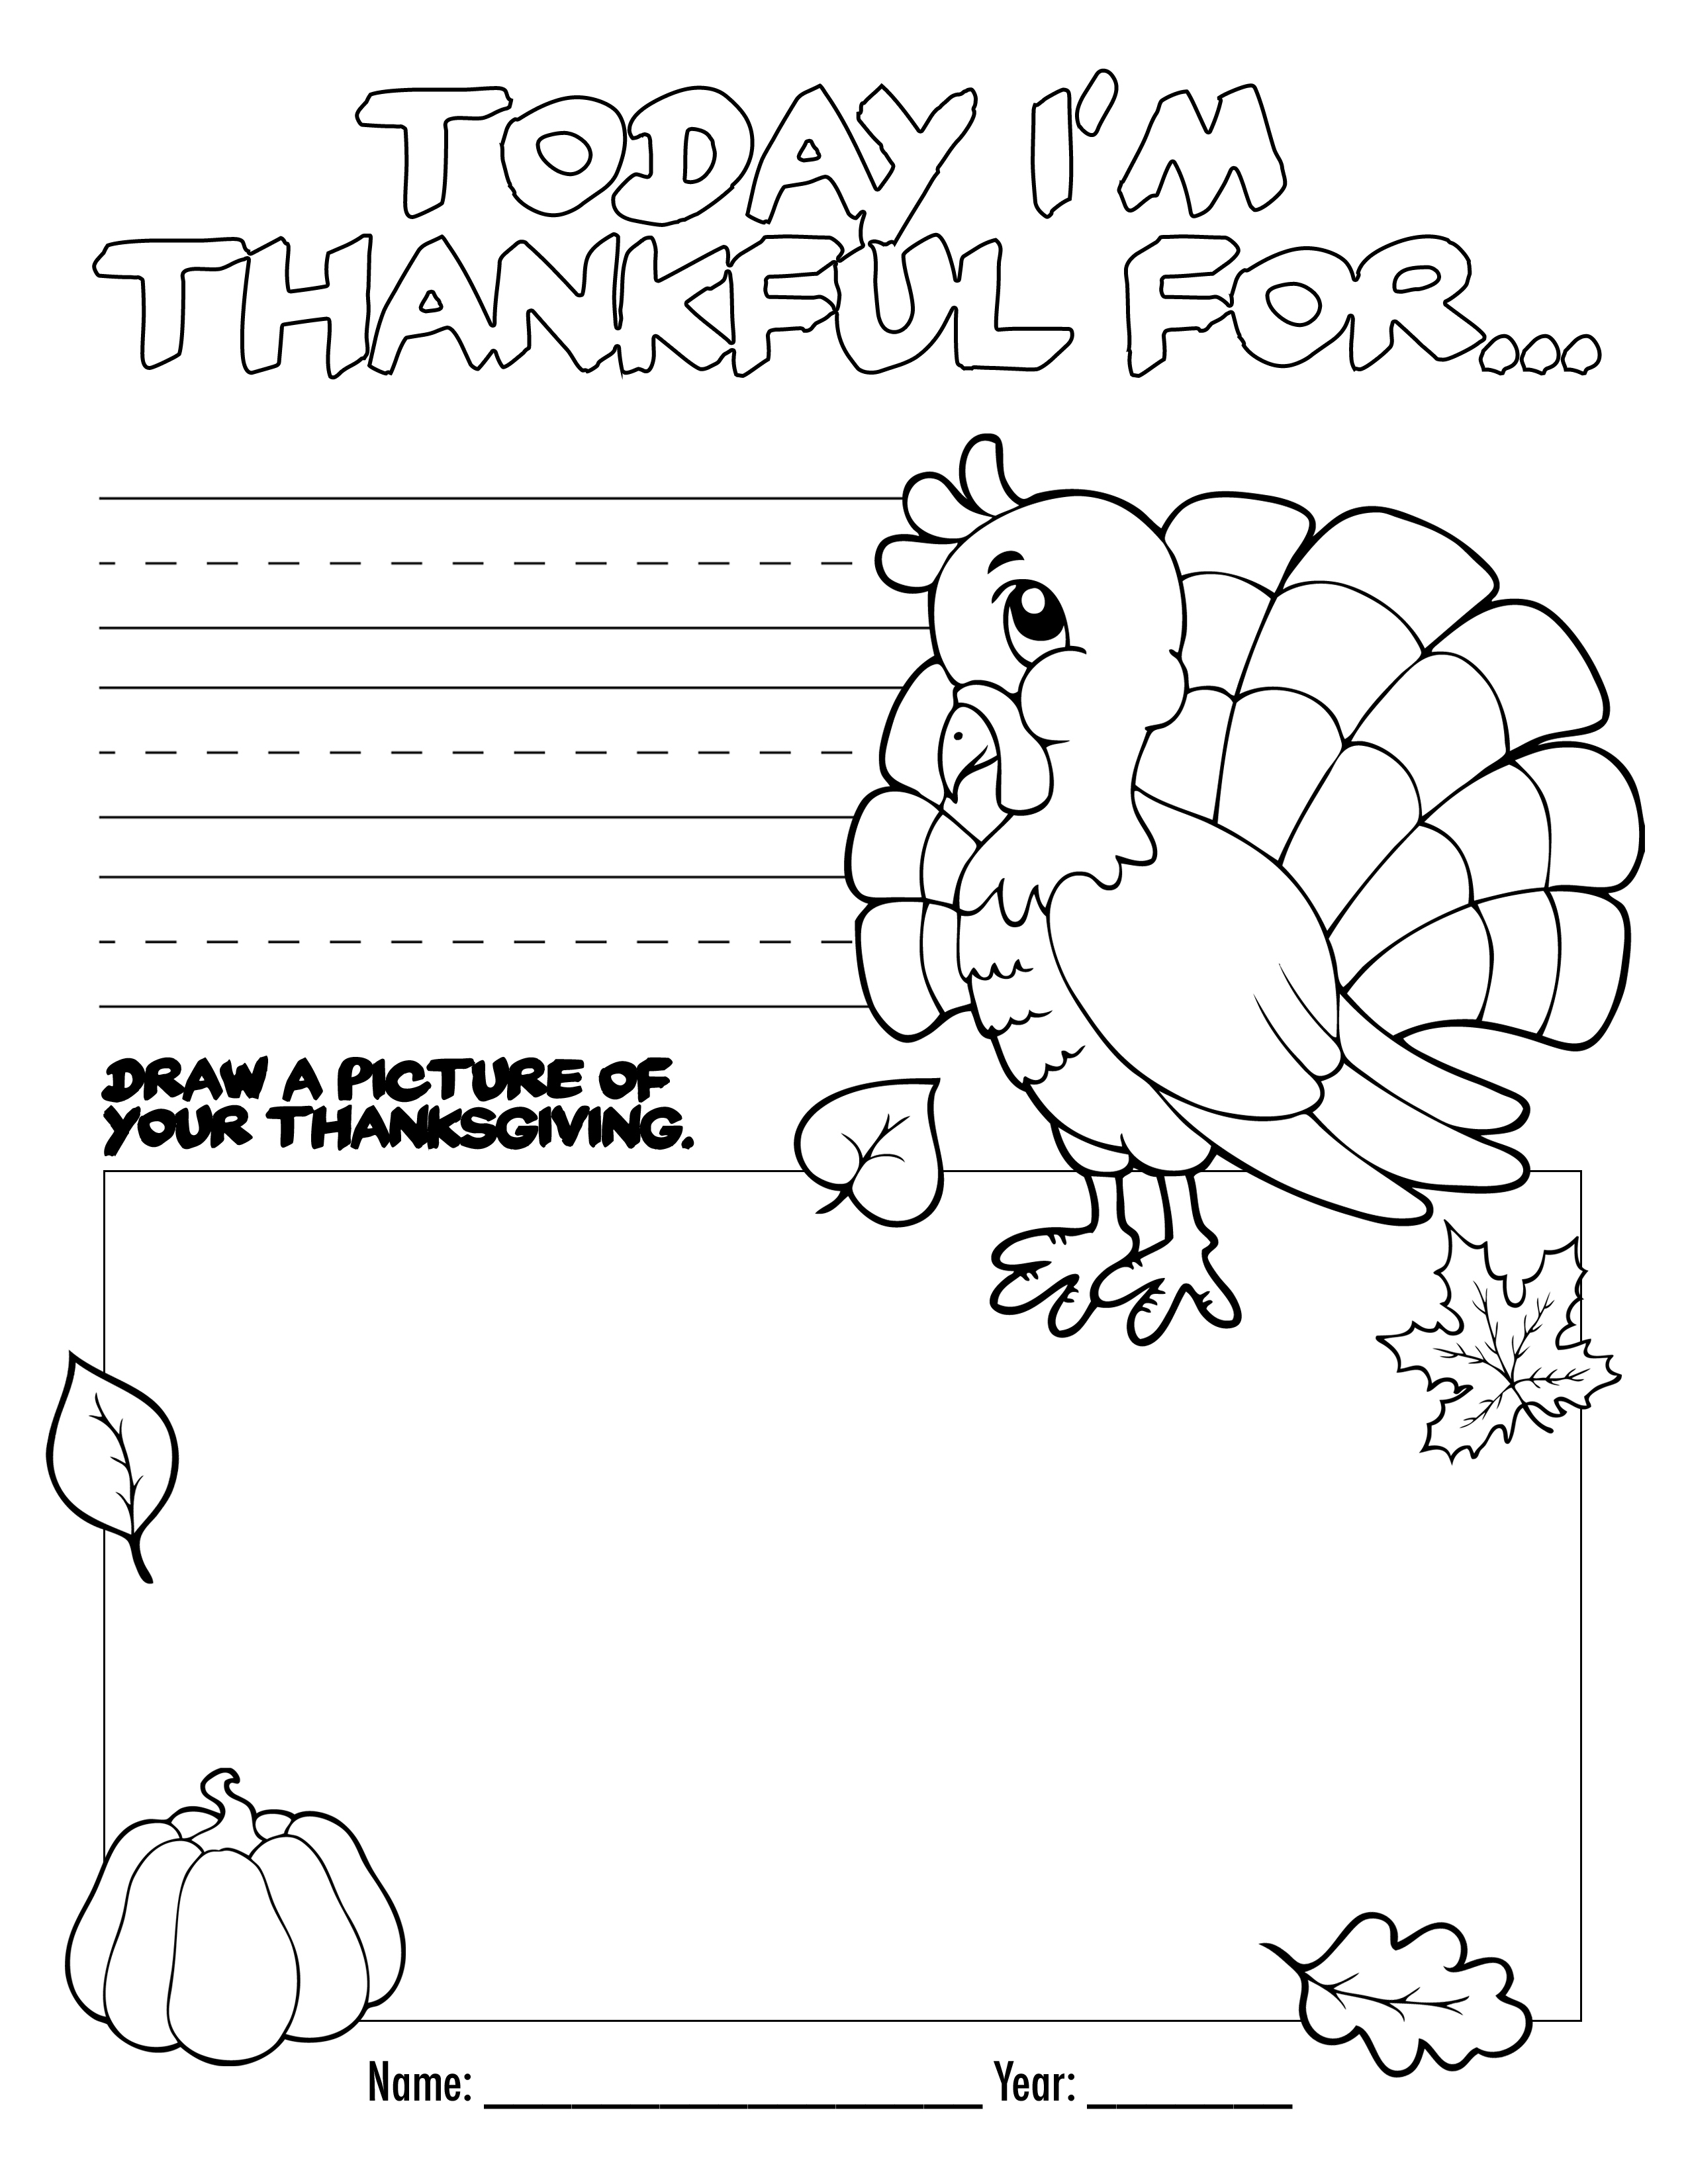 Thanksgiving Coloring Book Free Printable For The Kids! - Free | Free Printable Thanksgiving Worksheets